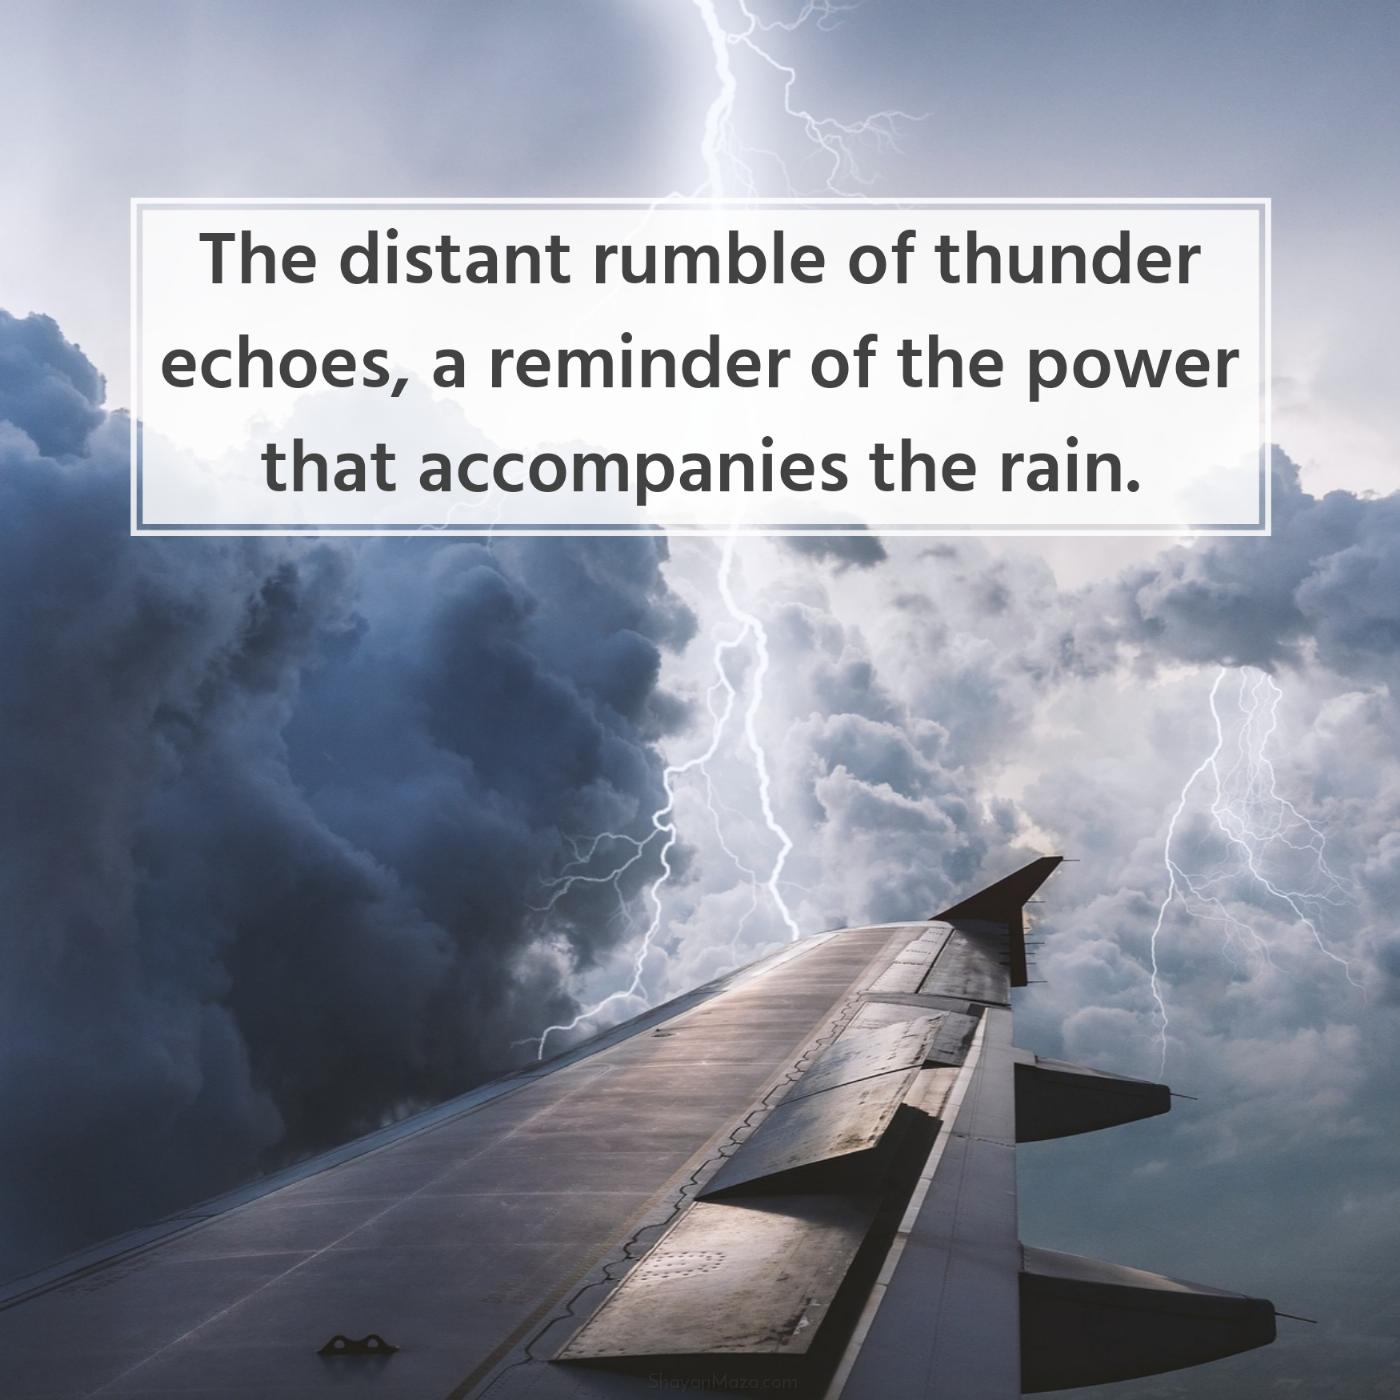 The distant rumble of thunder echoes a reminder of the power